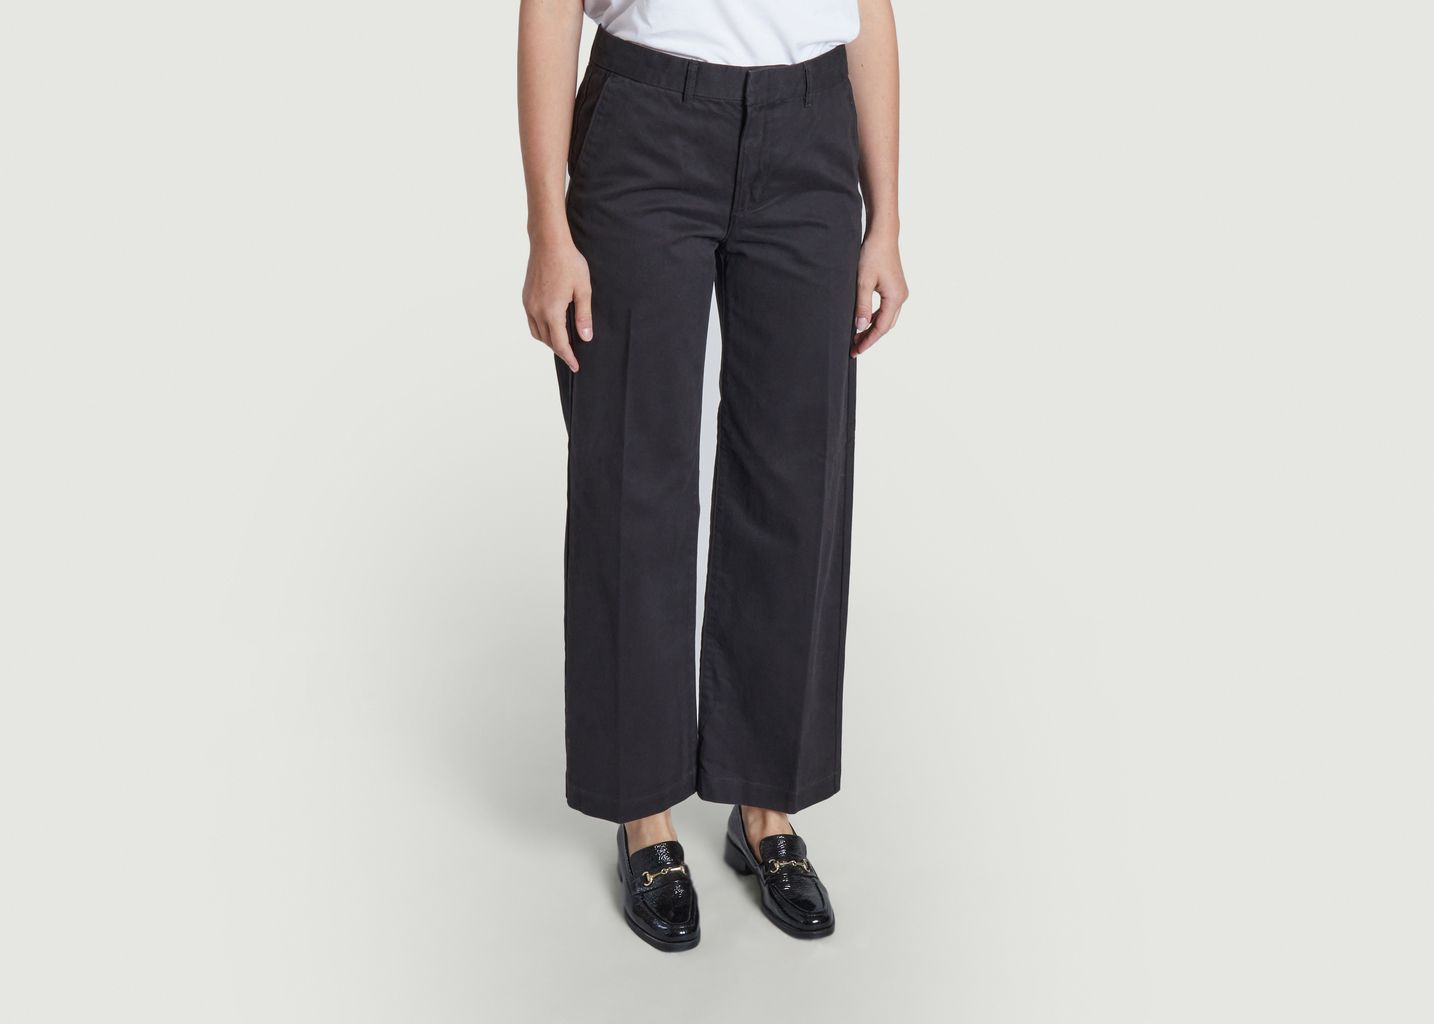 Baggy trousers - Levi's Red Tab